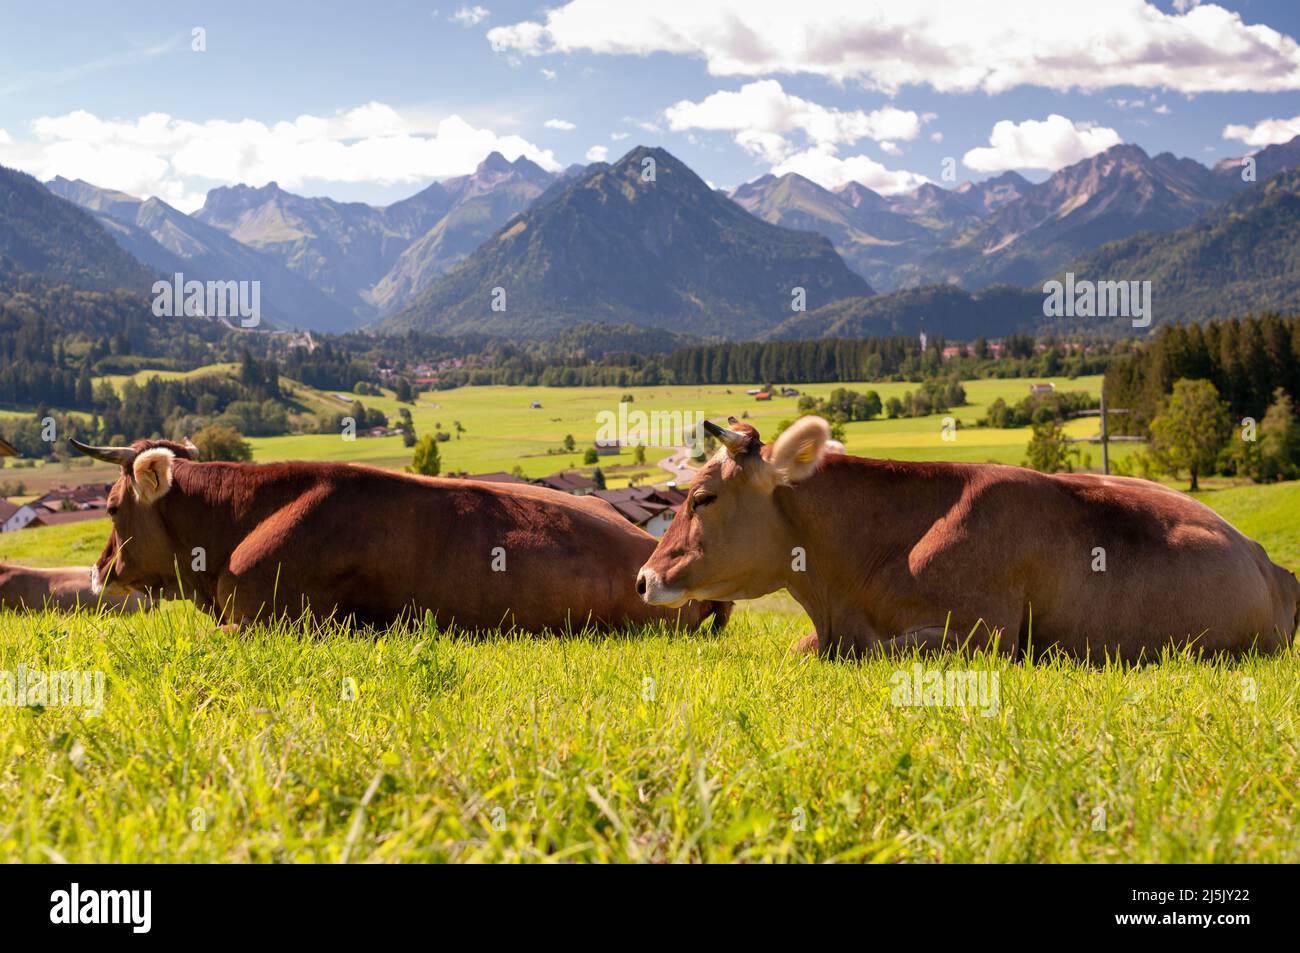 Cow in the Alps, Bavaria Germany Stock Photo